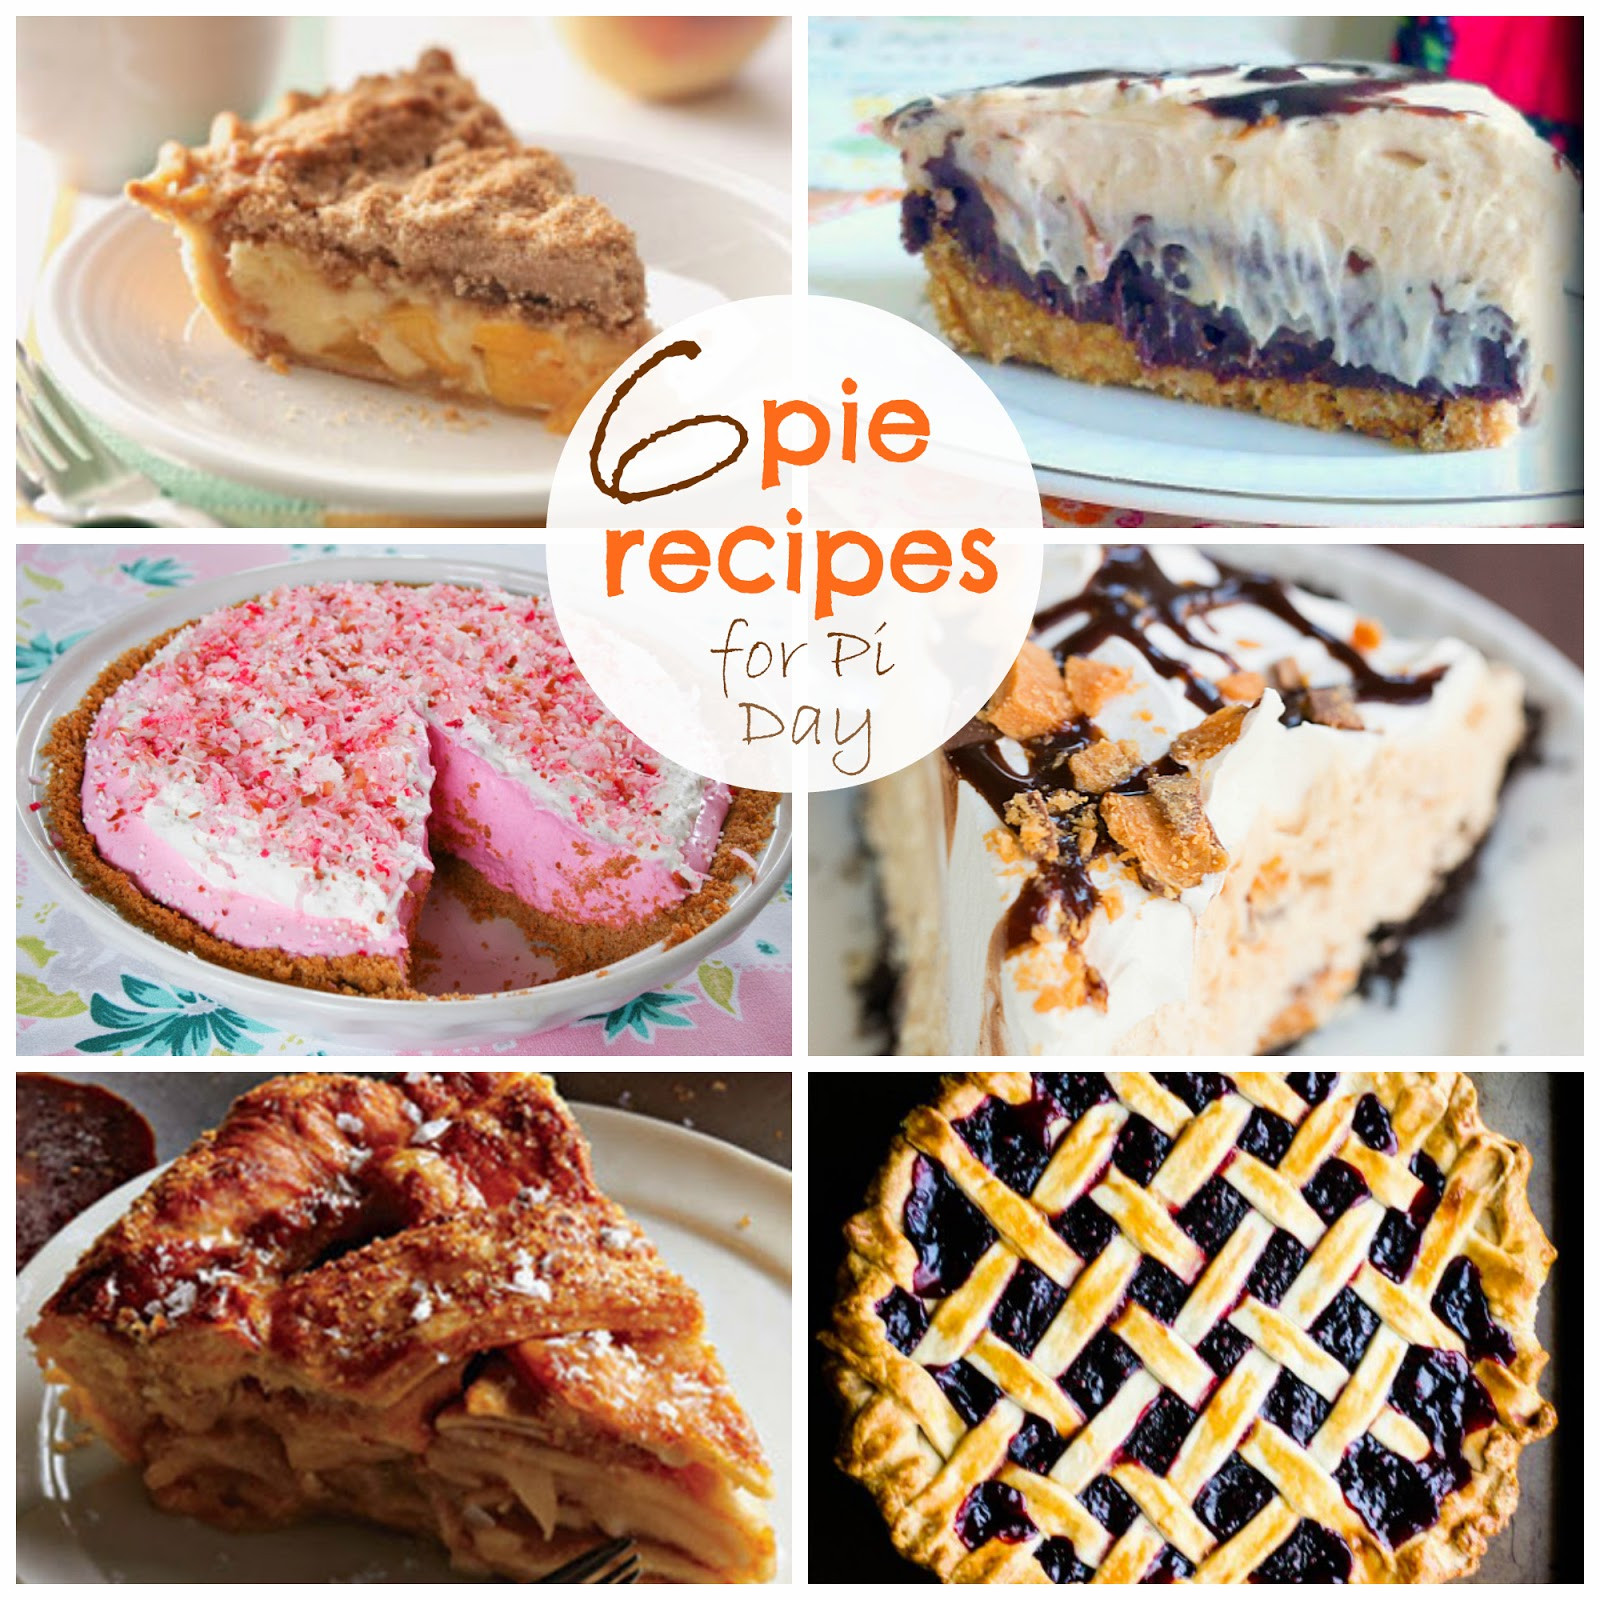 Pi Day Pie Recipe
 Sowdering About Amazing Pie Recipes for Pi Day